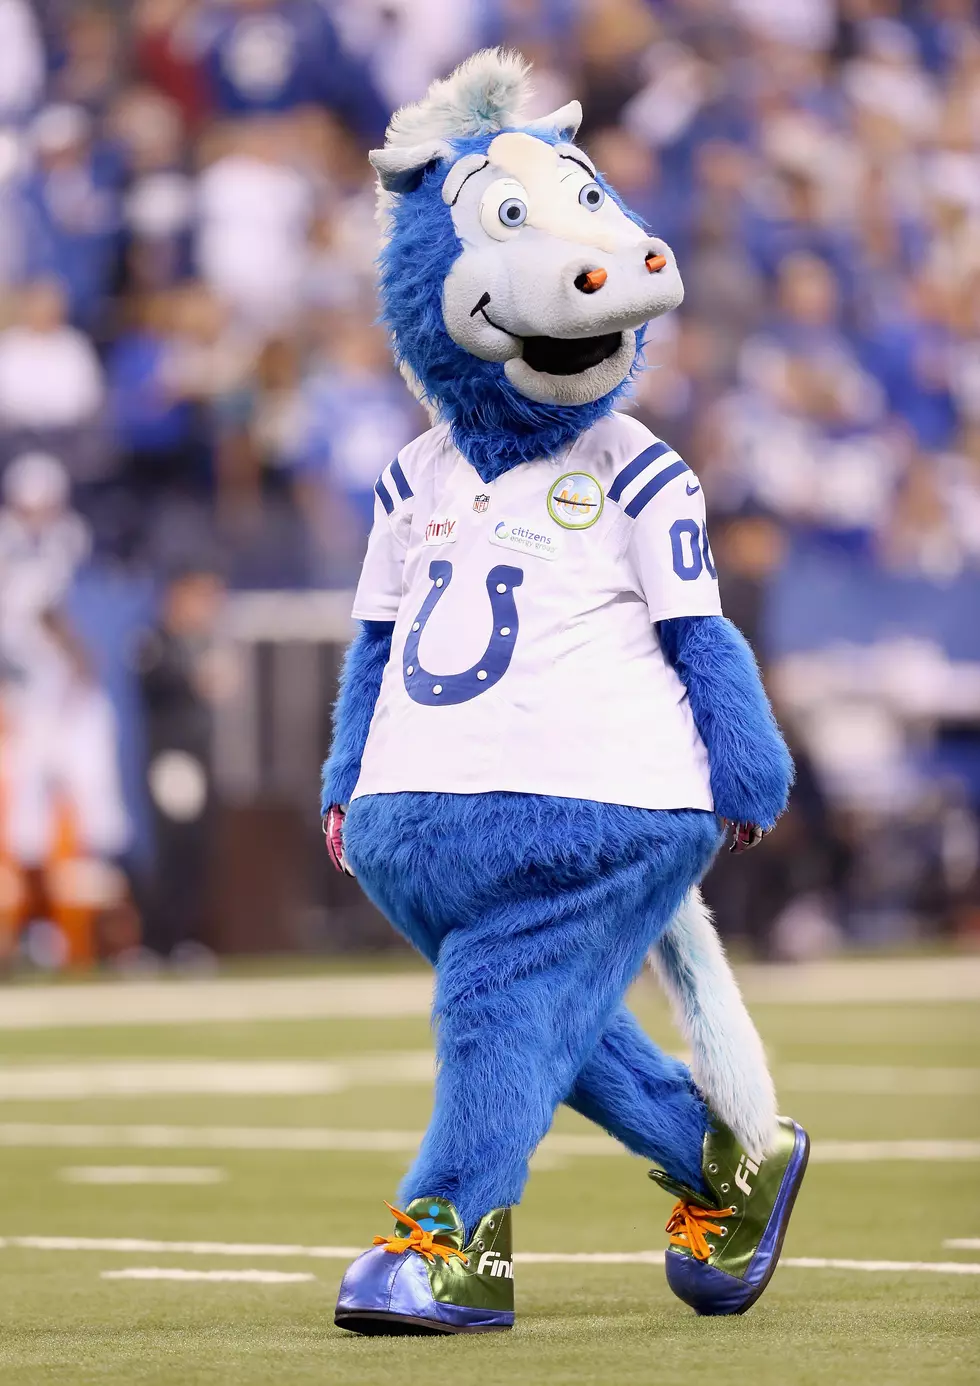 Children’s Museum of Indy is FREE November 9th Thanks to the Colts